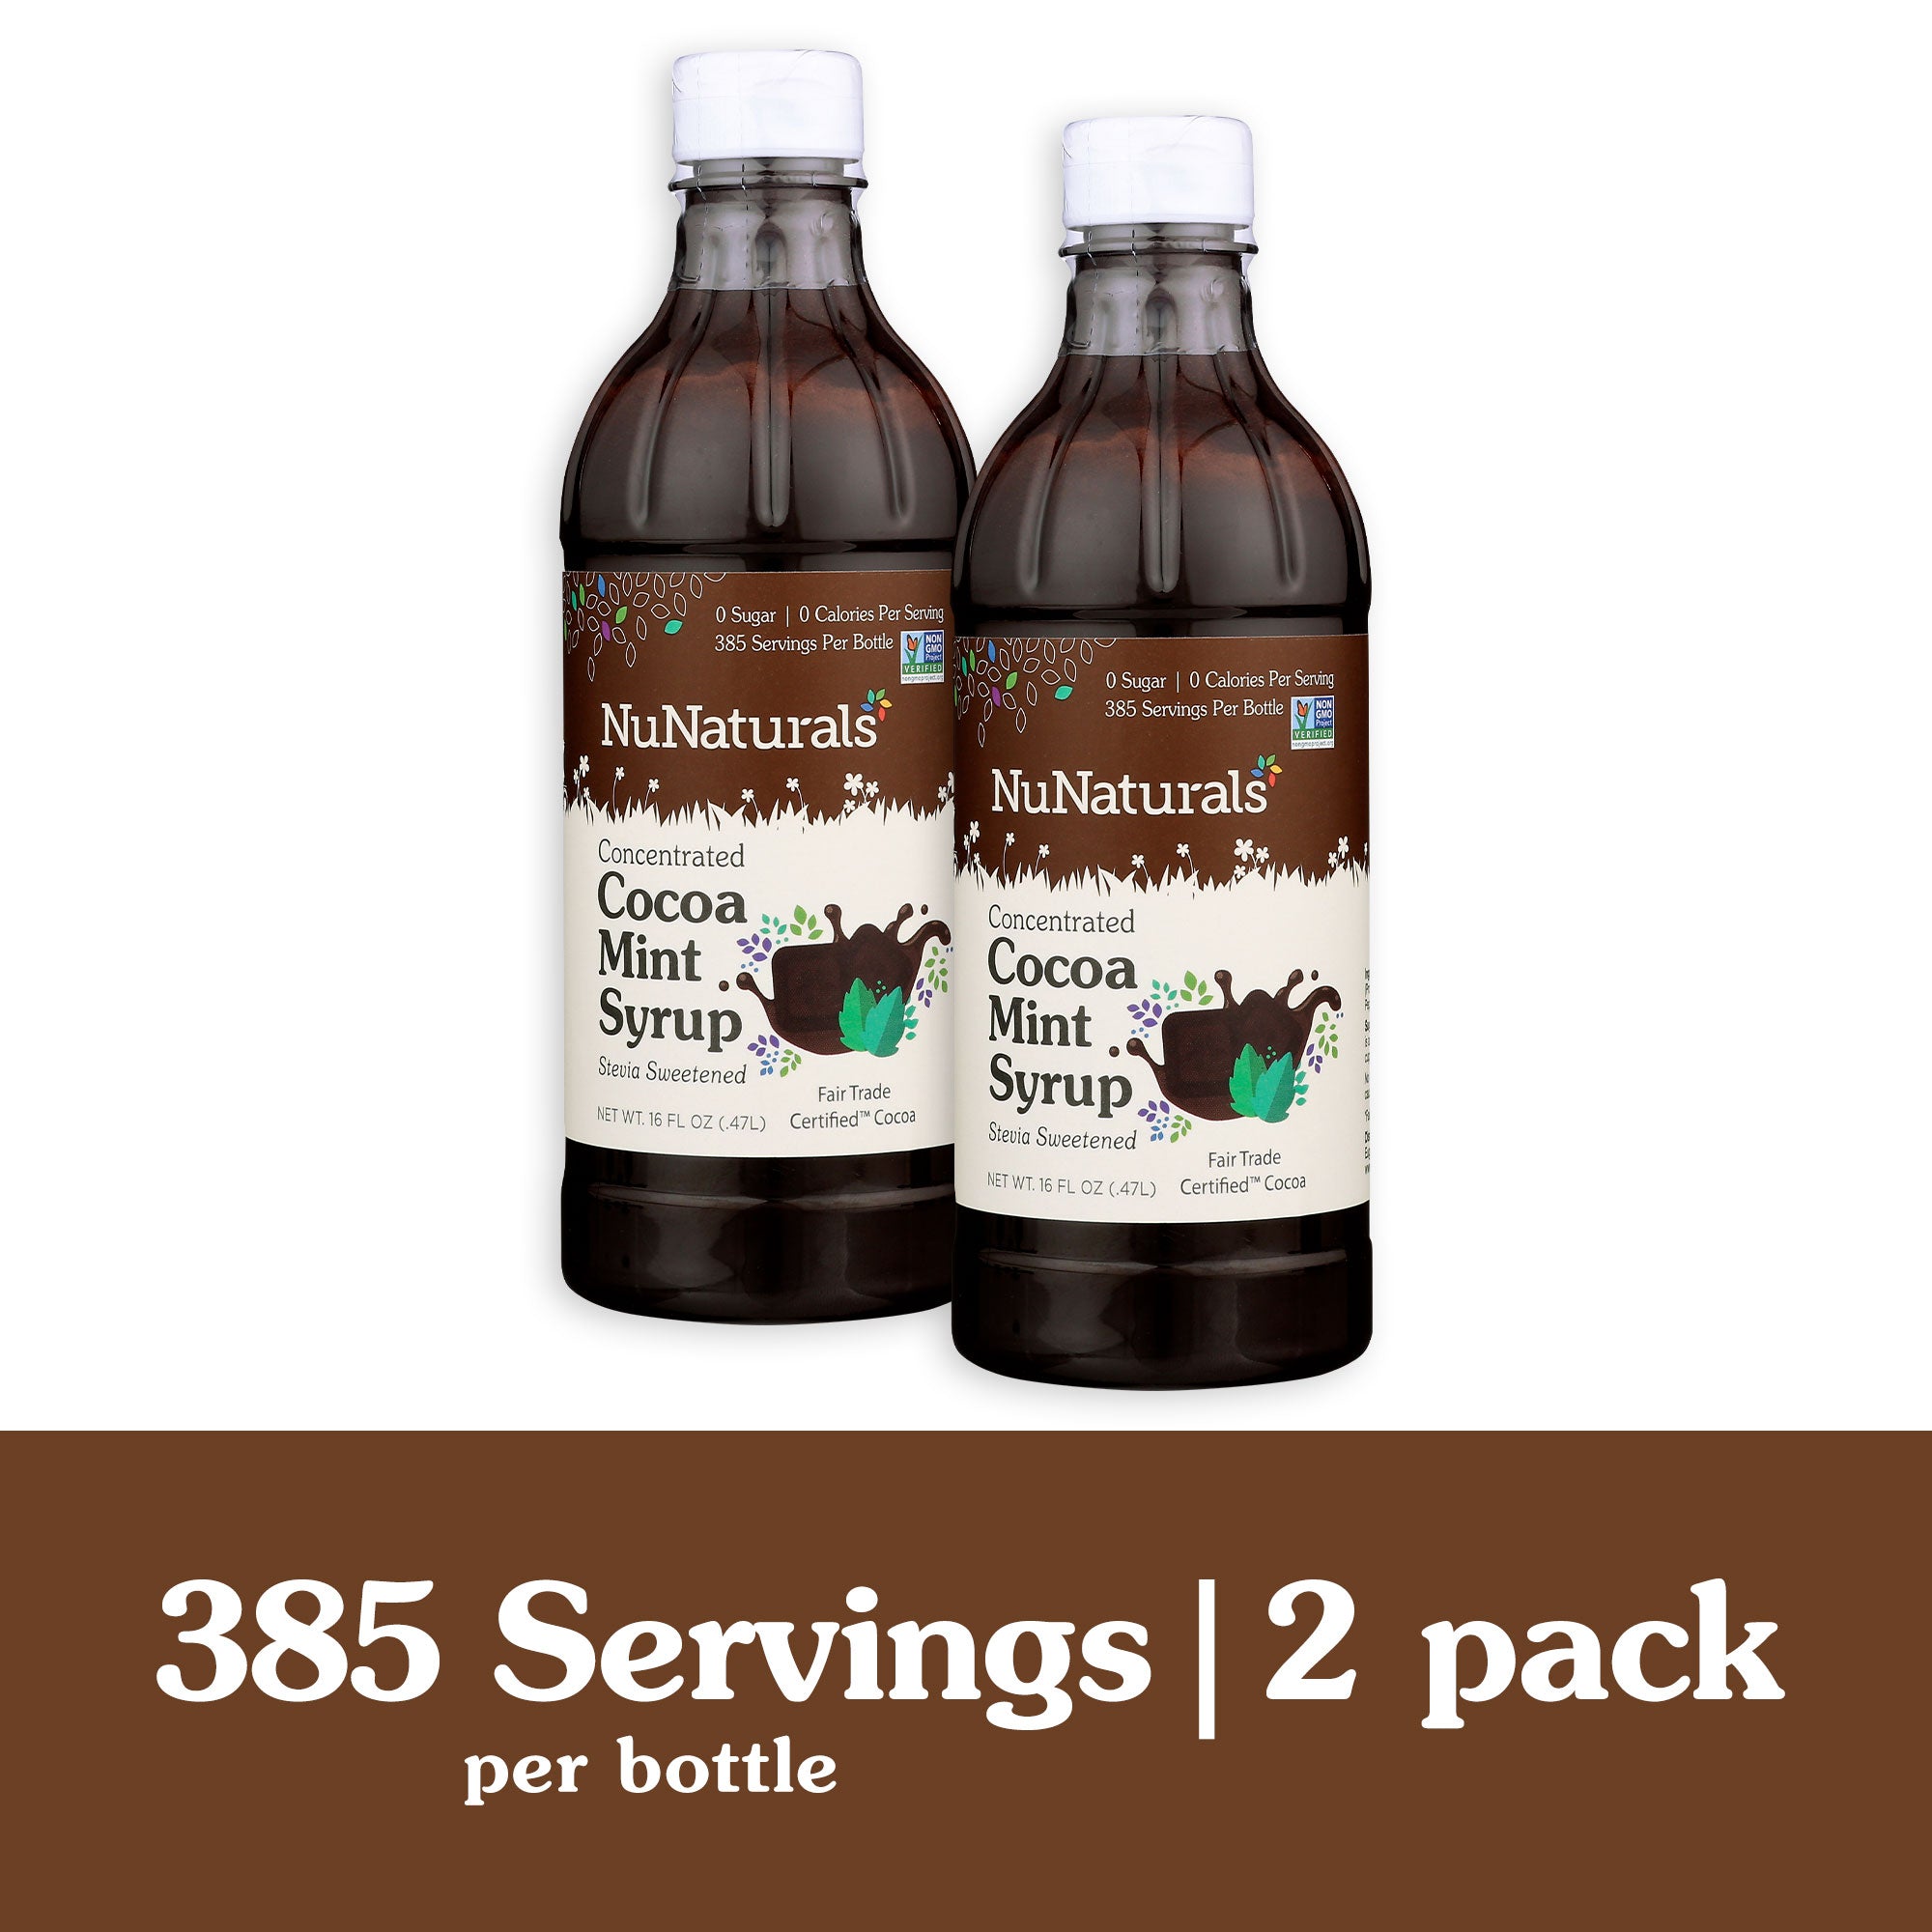 Stevia Cocoa Mint Syrup 2 Pack Servings Per Bottle